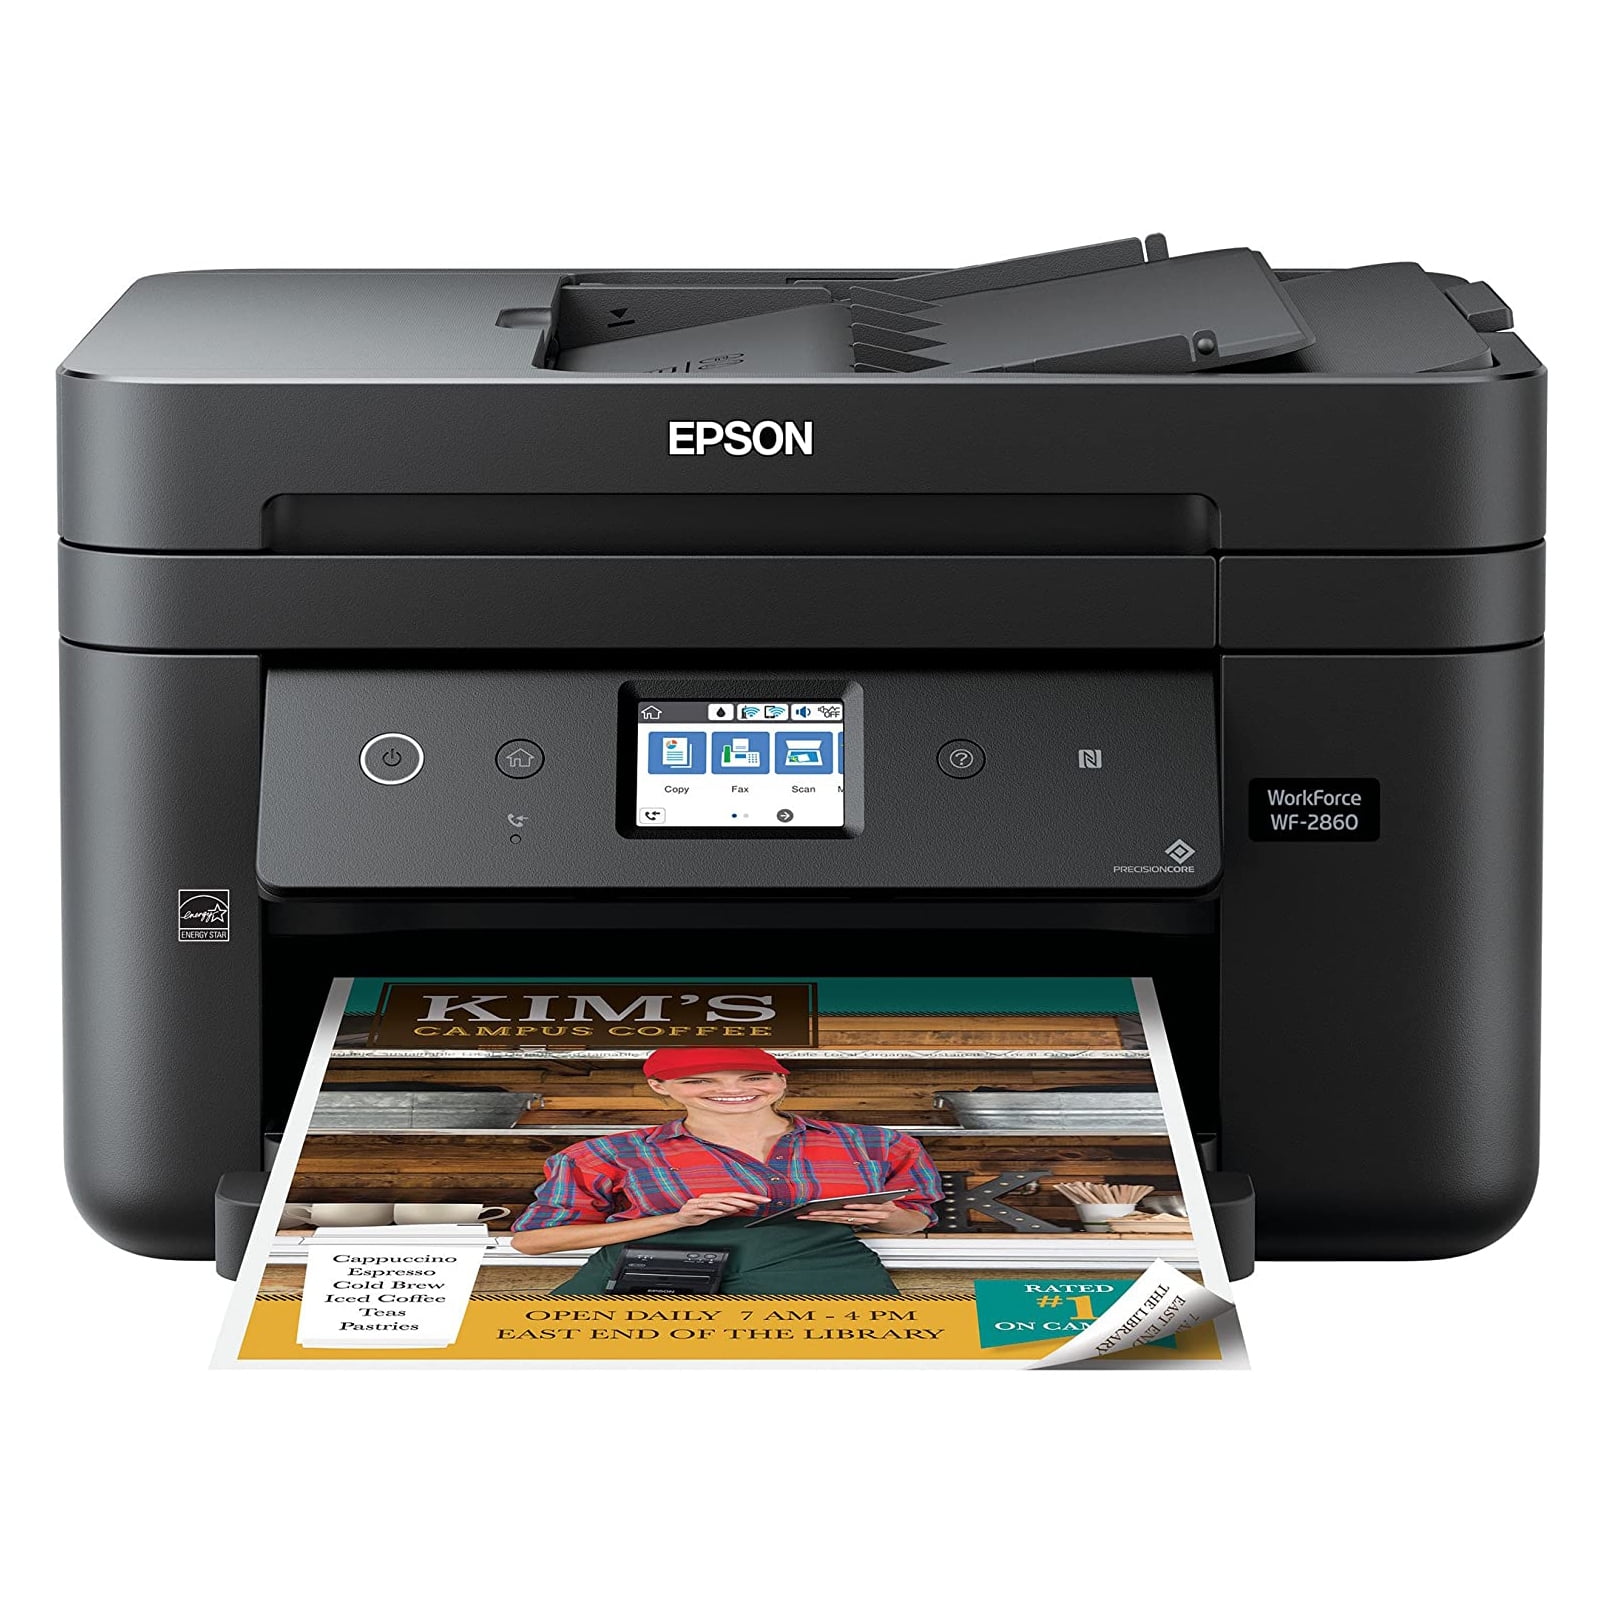 WorkForce Pro WF-4833 Wireless All-in-One Printer with Auto 2 